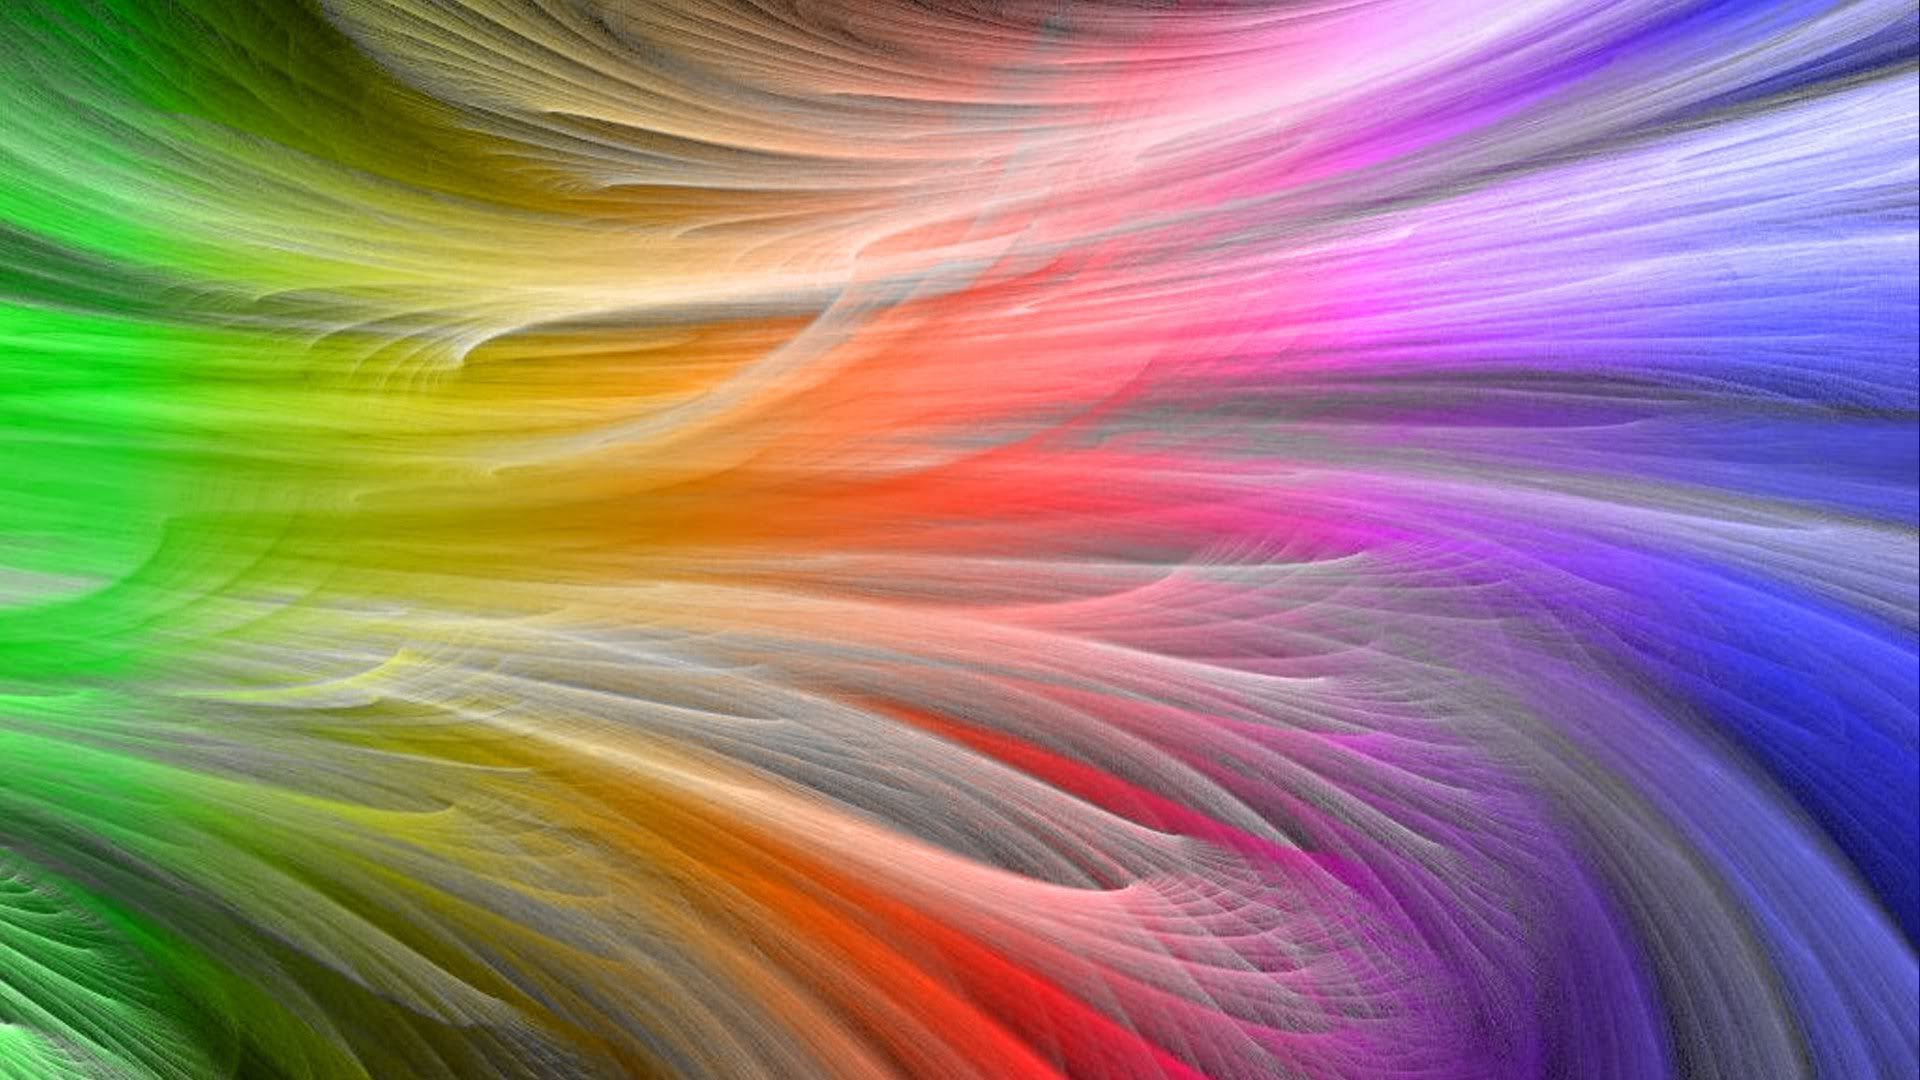 98092 download wallpaper motley, abstract, lines, multicolored, bright, shroud screensavers and pictures for free